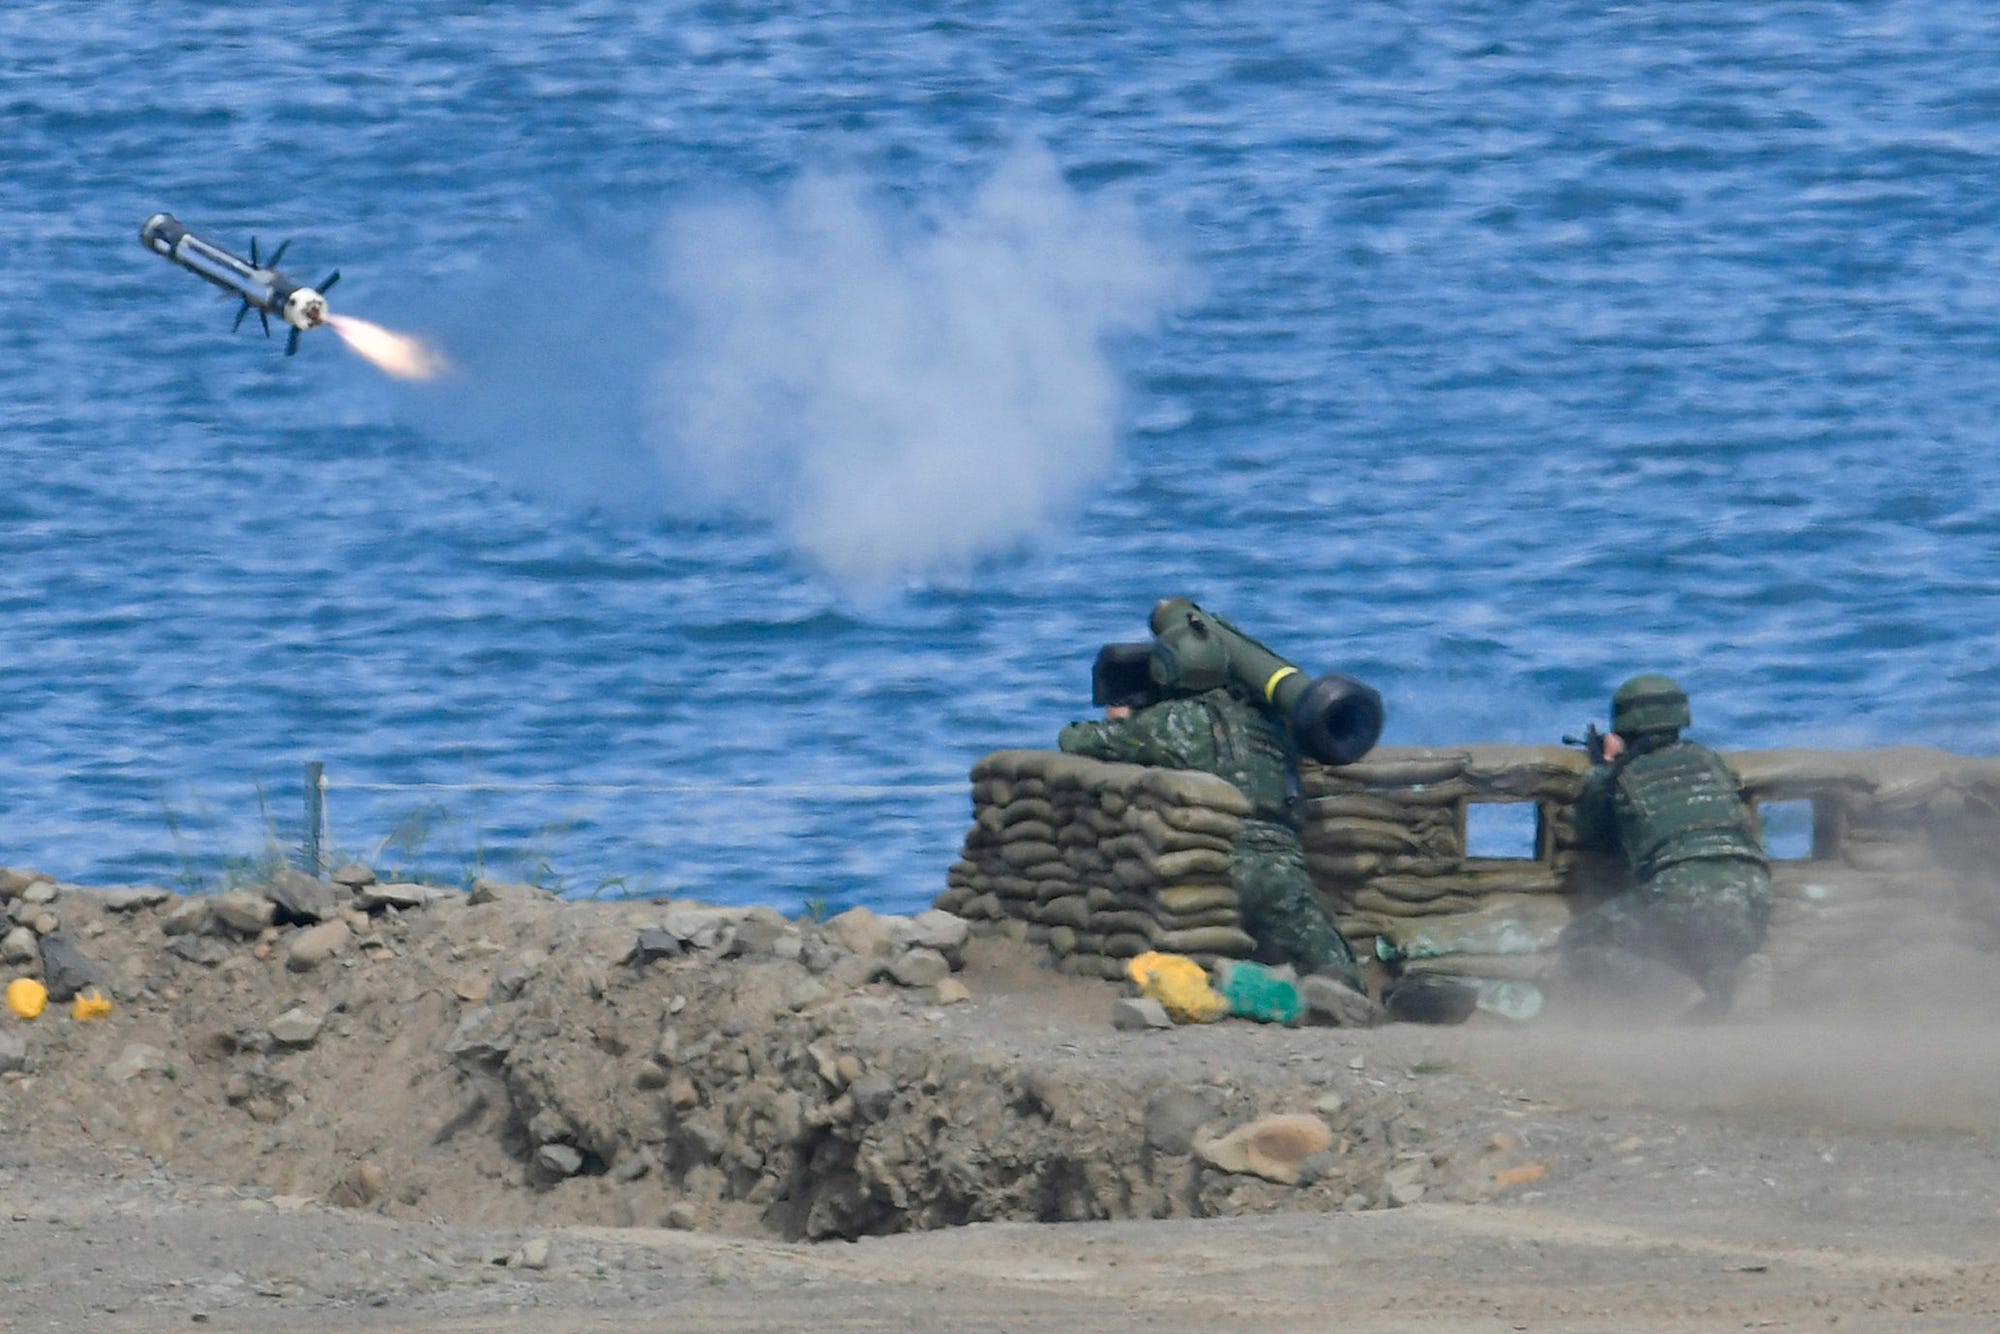 Taiwan soldier launches Javelin